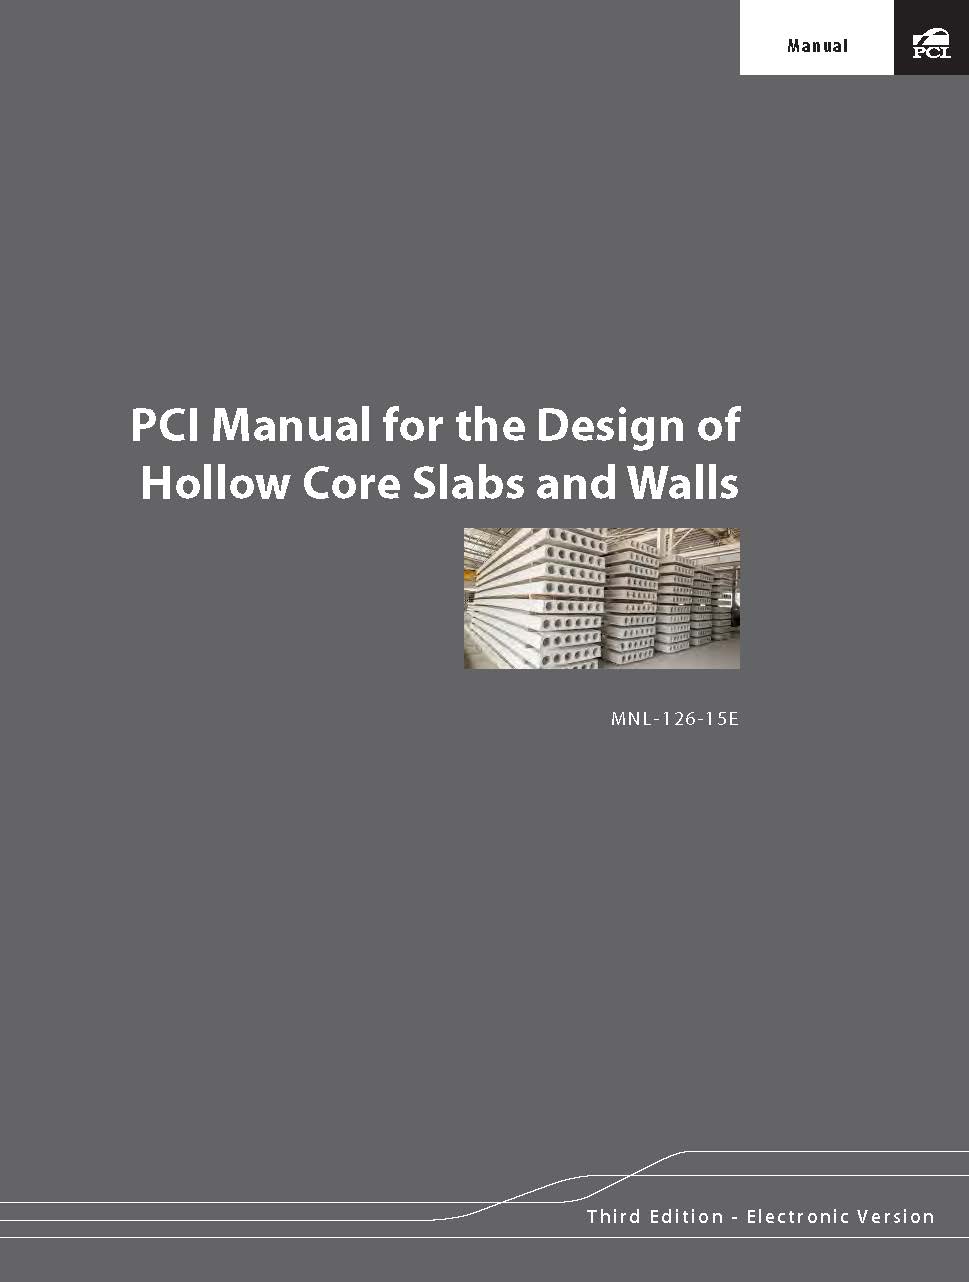 PCI Manual for the Design of Hollow Core Slabs and Walls